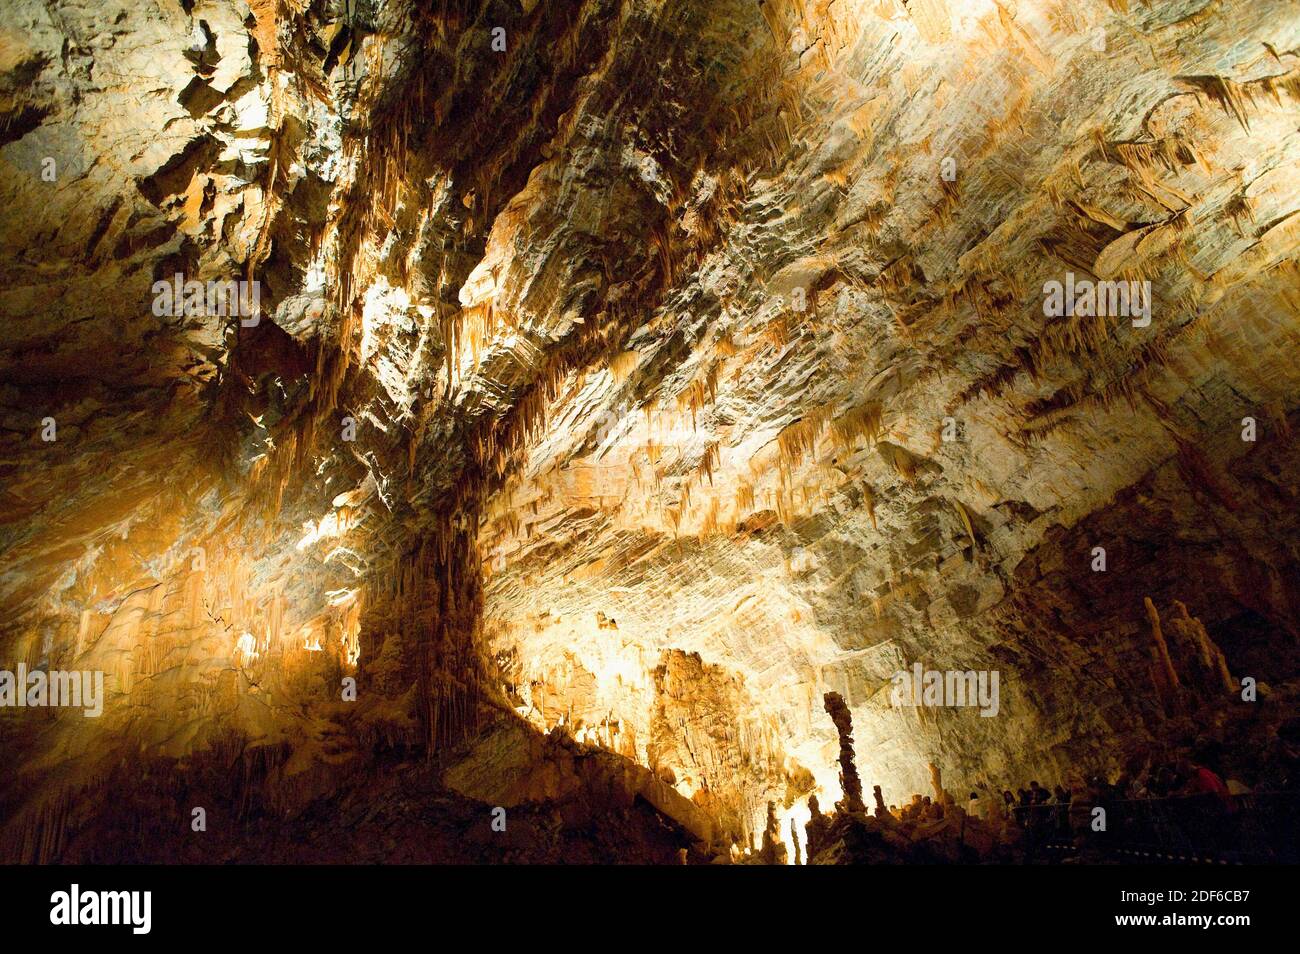 Giant chasm of Cabrespine. Cave with stalactites and stalagmites. Aude, France. Stock Photo